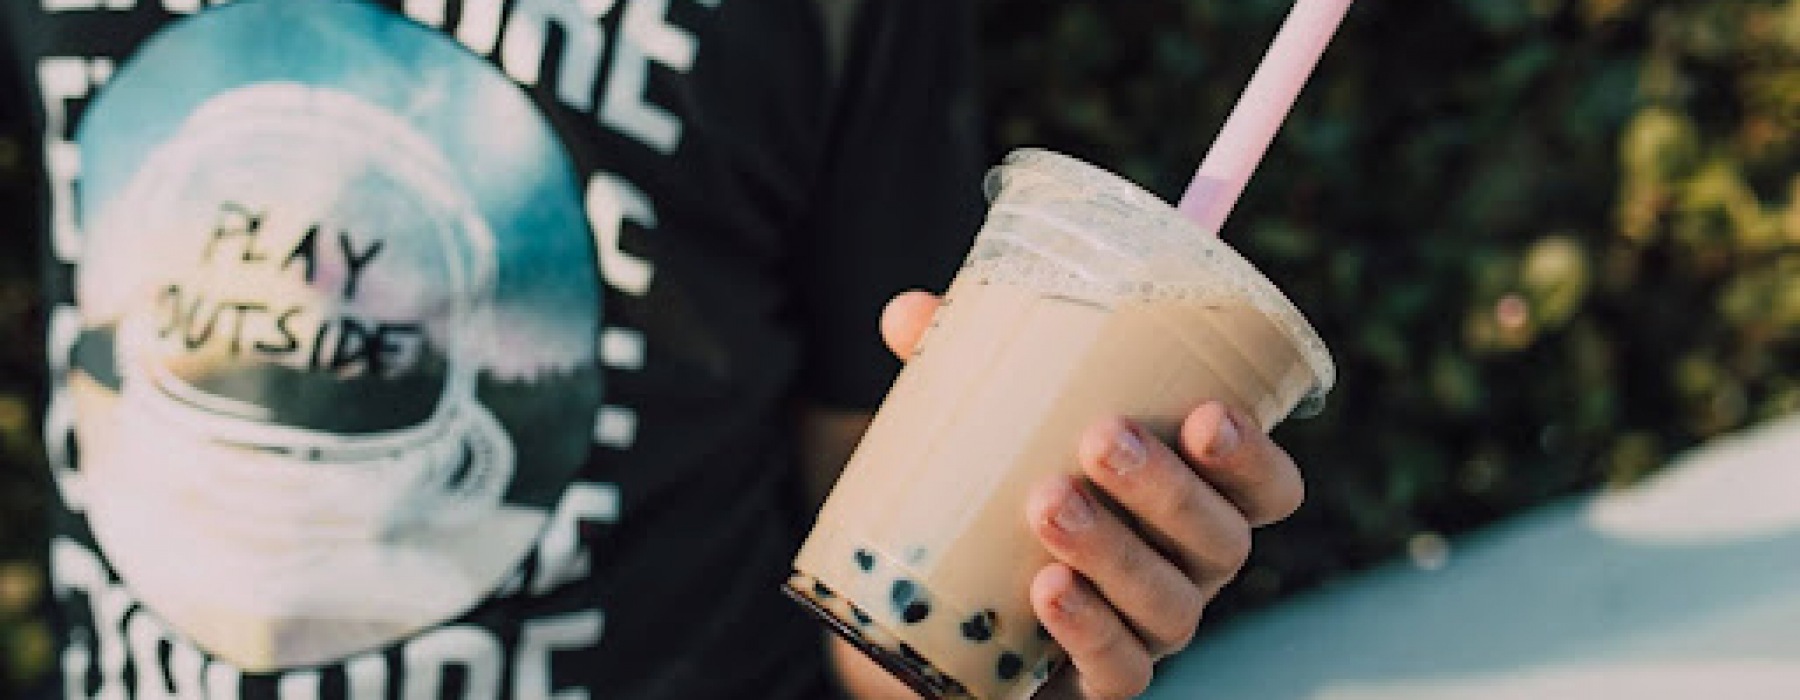 Someone sipping on some bubble tea in Tacoma